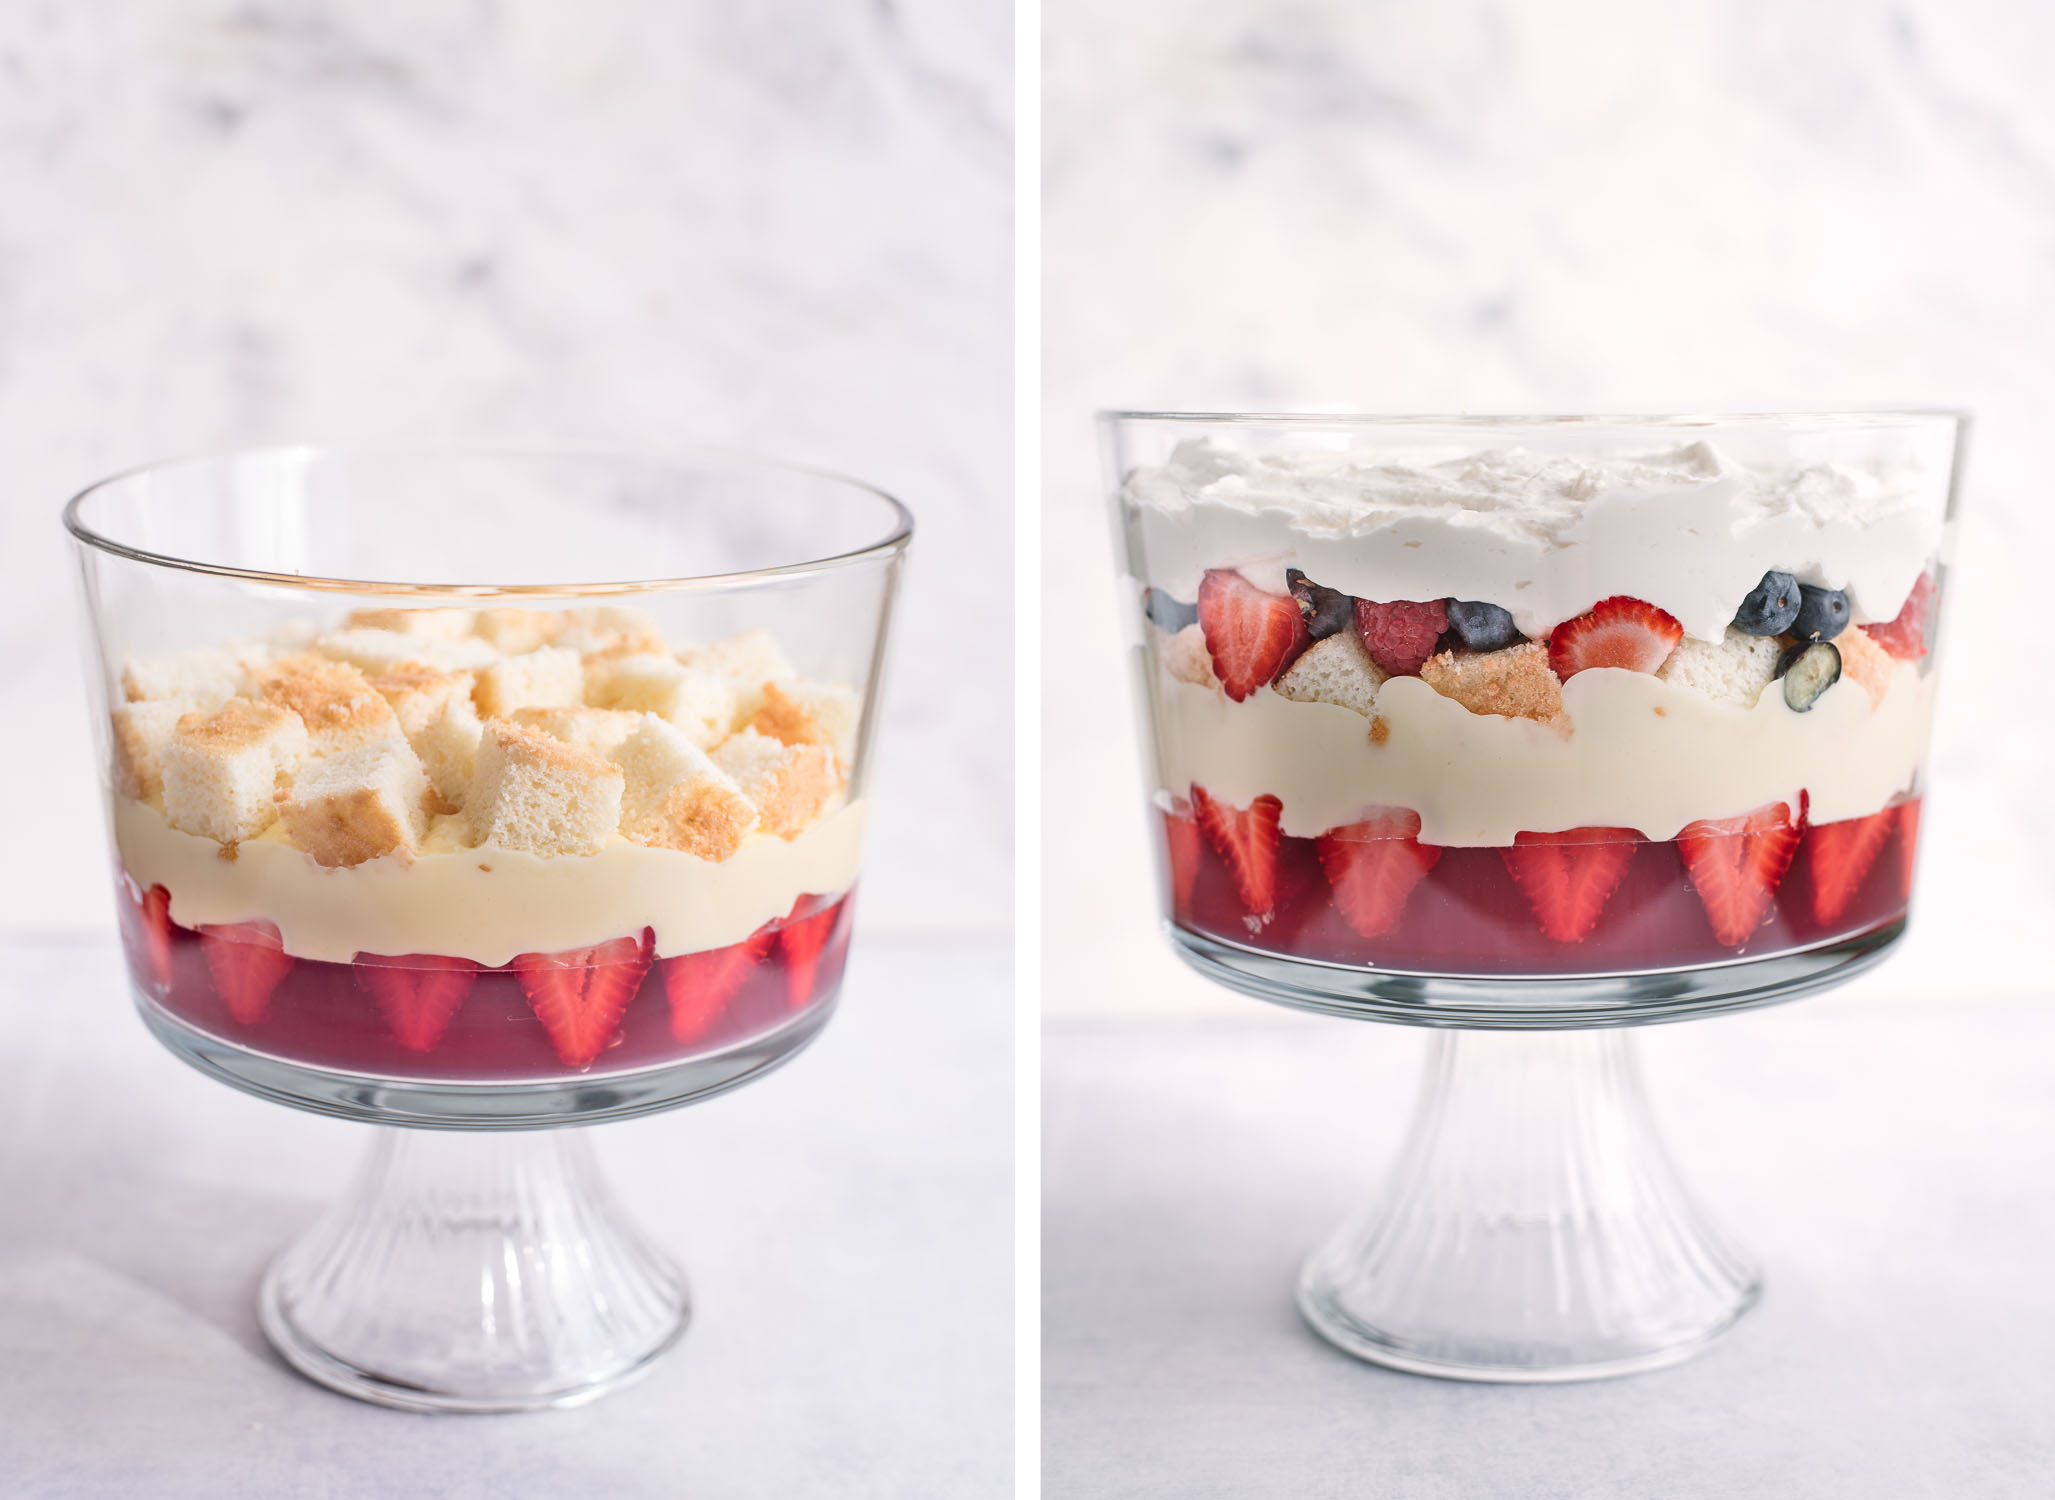 Holiday Berry Trifle